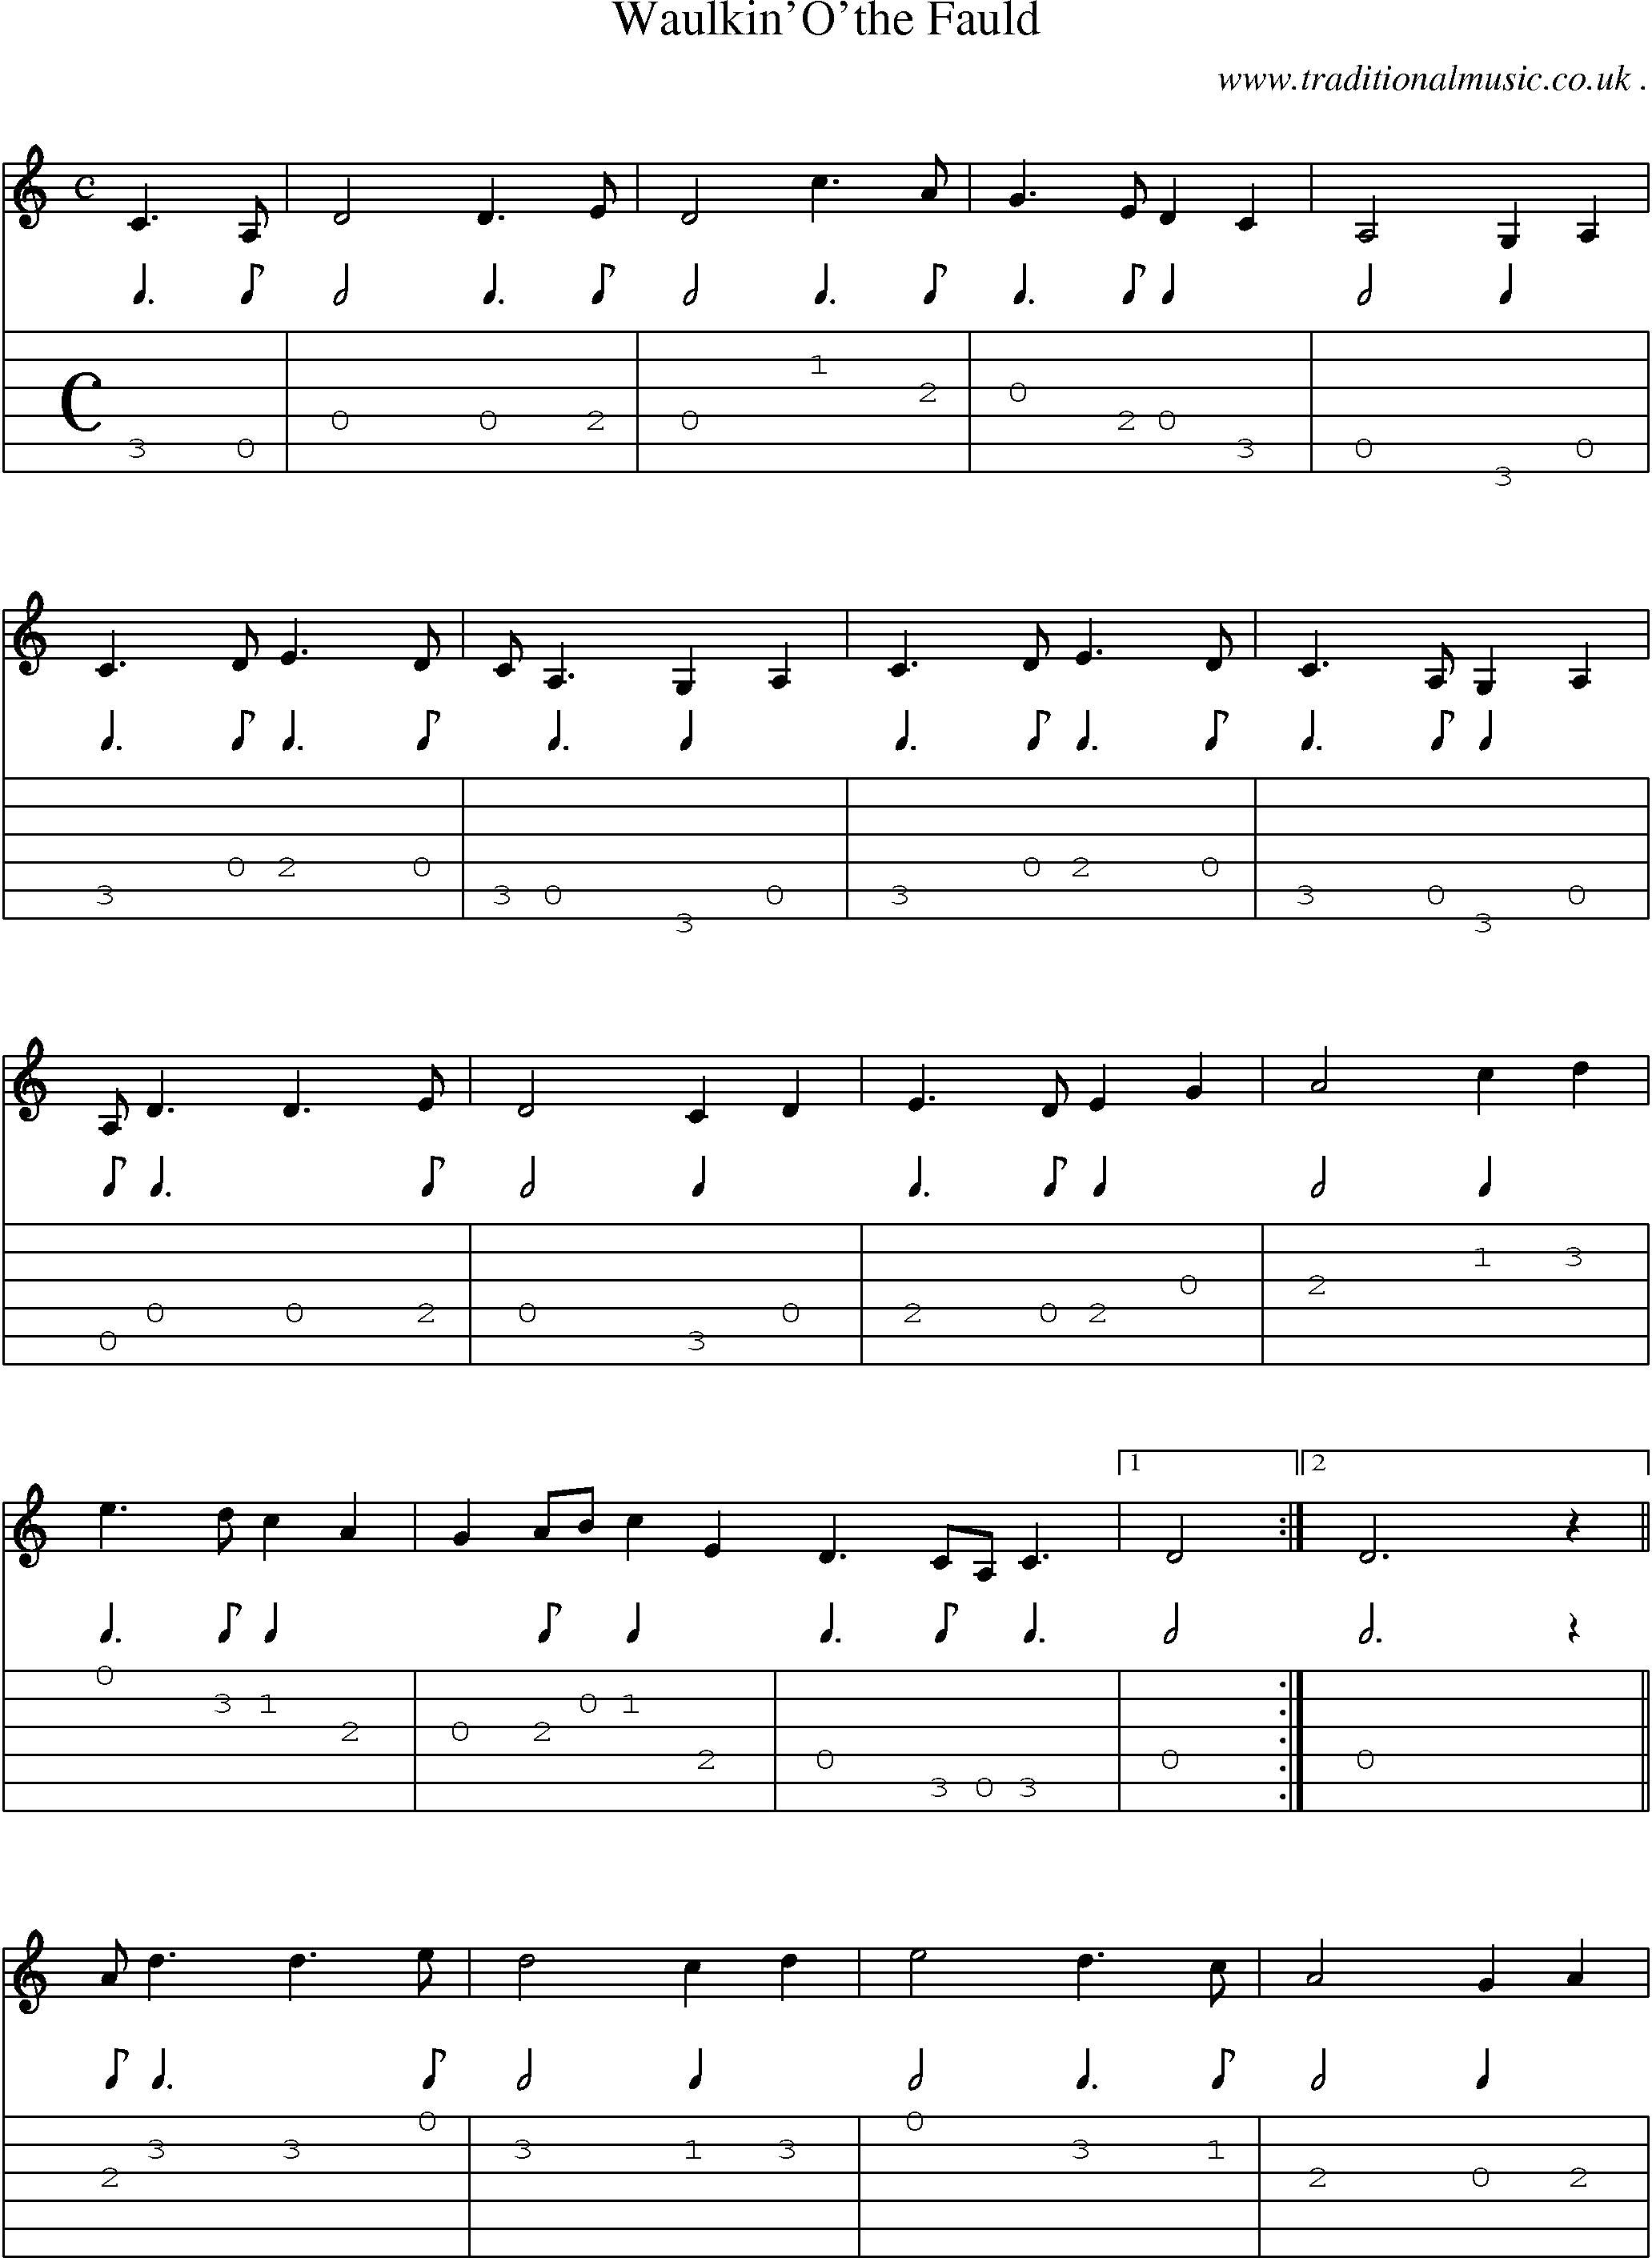 Sheet-music  score, Chords and Guitar Tabs for Waulkinothe Fauld